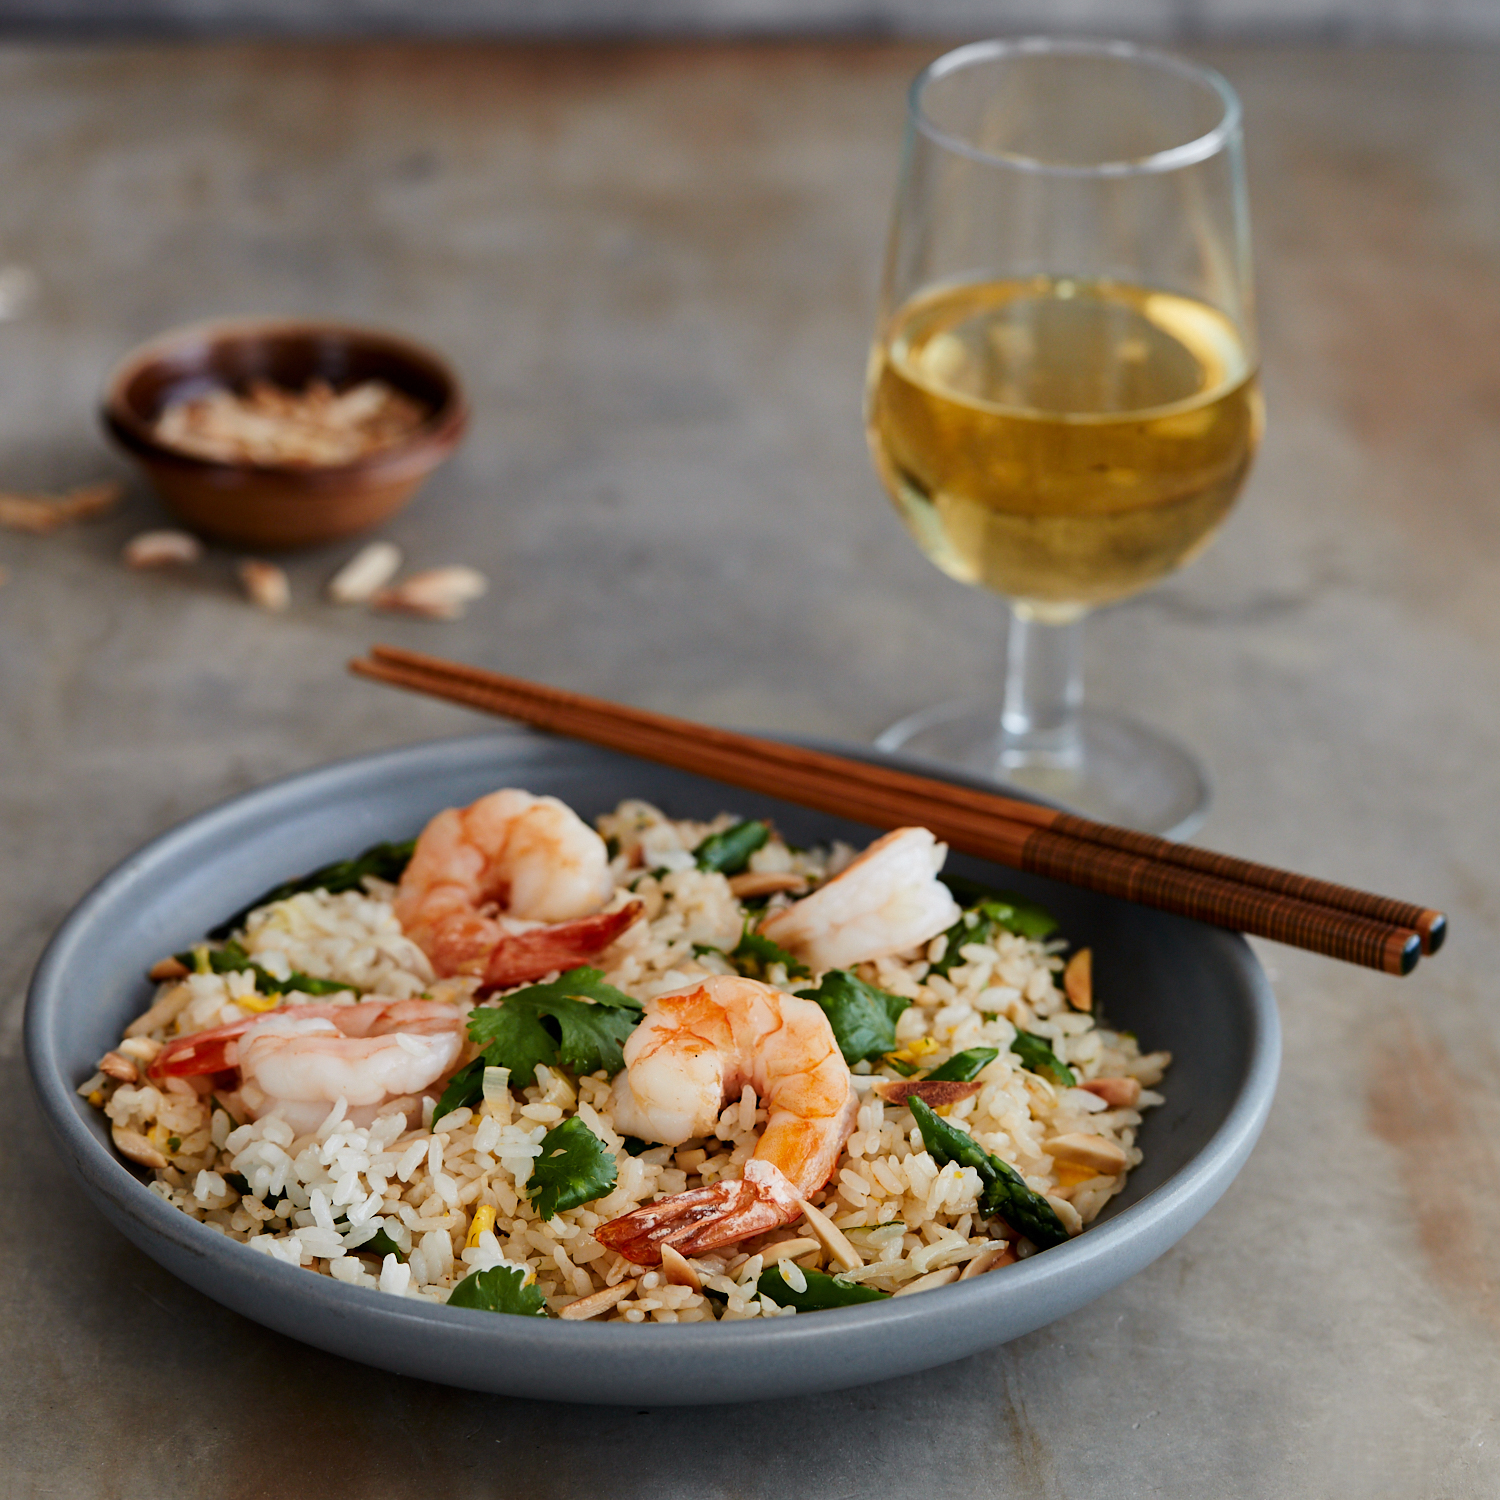 Shrimp Fried Rice with Asparagus, Leeks, and Almonds